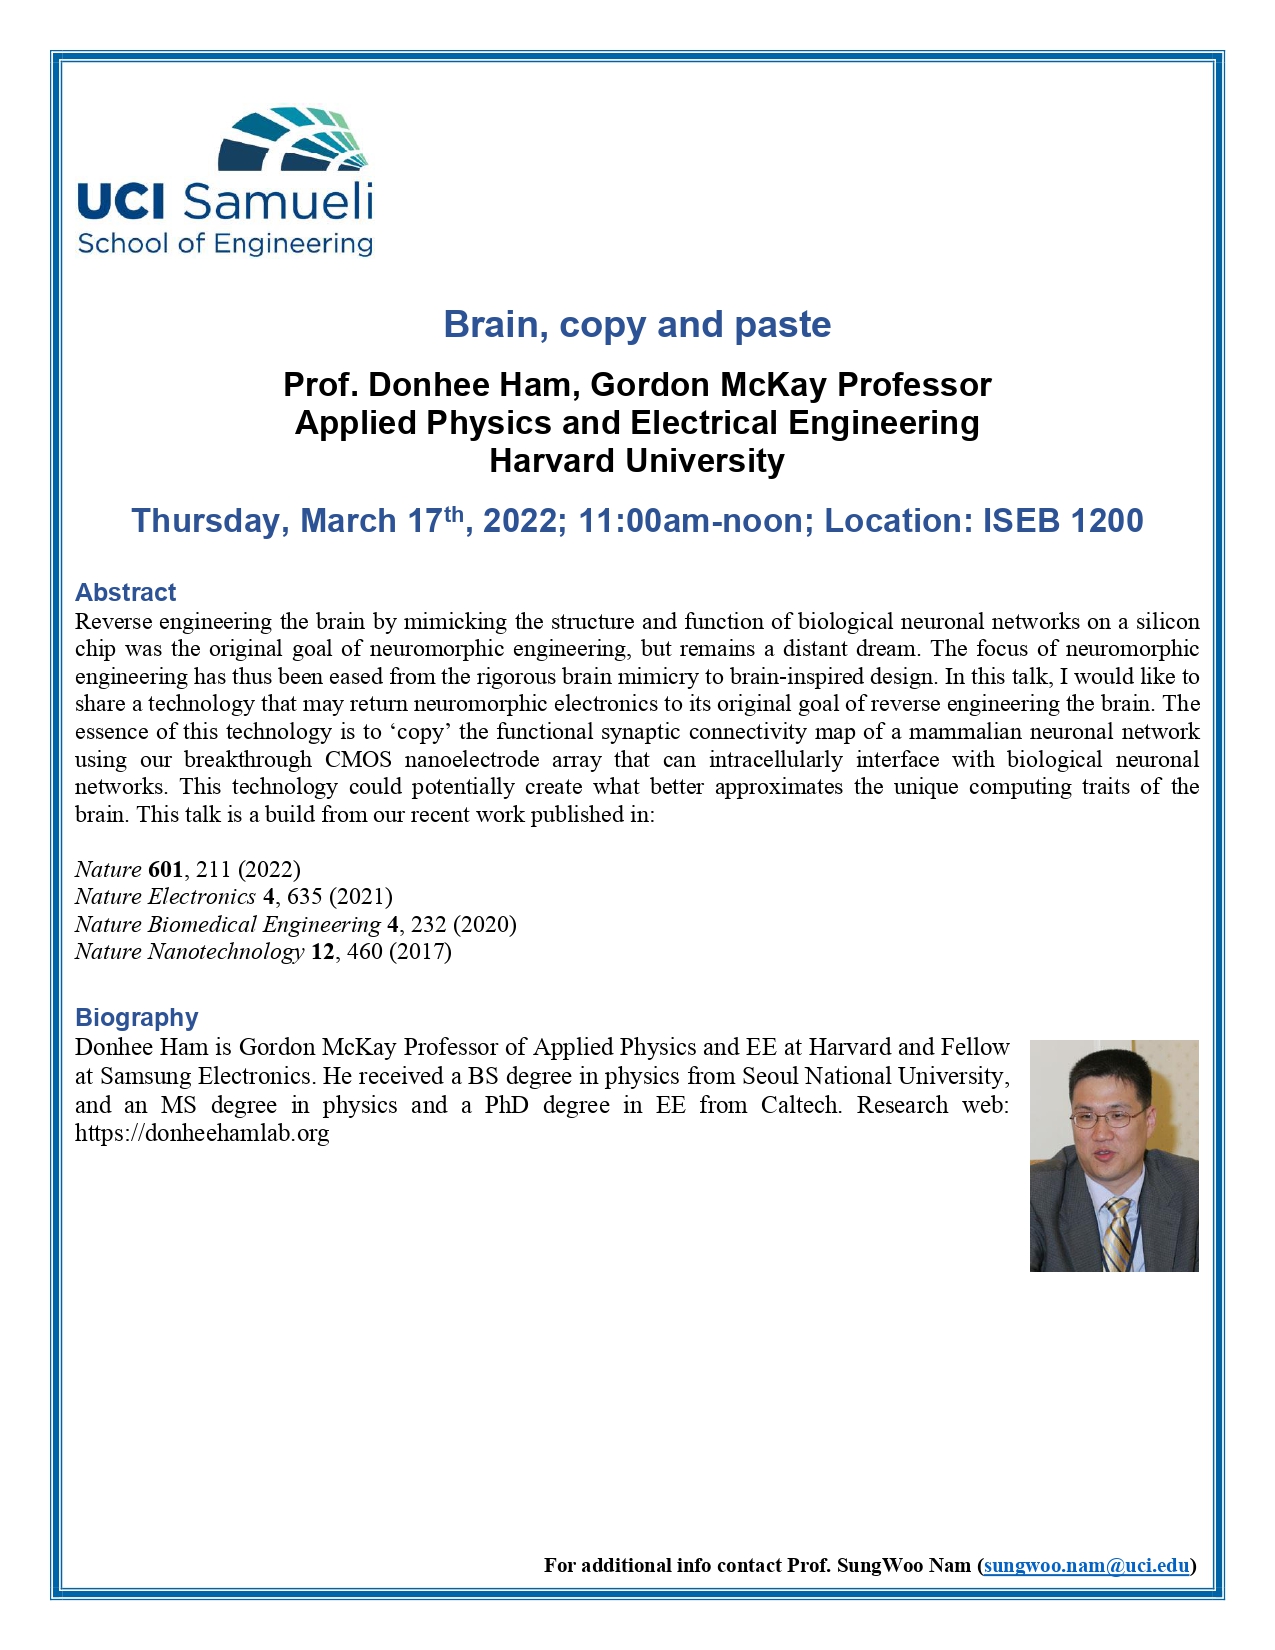 Brain, copy, and paste Prof. Donhee Ham, Gordon McKay Professor Applied Physics and Electrical Engineering Harvard University Thursday, March 17th, 2022; 11:00am-noon Location: ISEB 1200